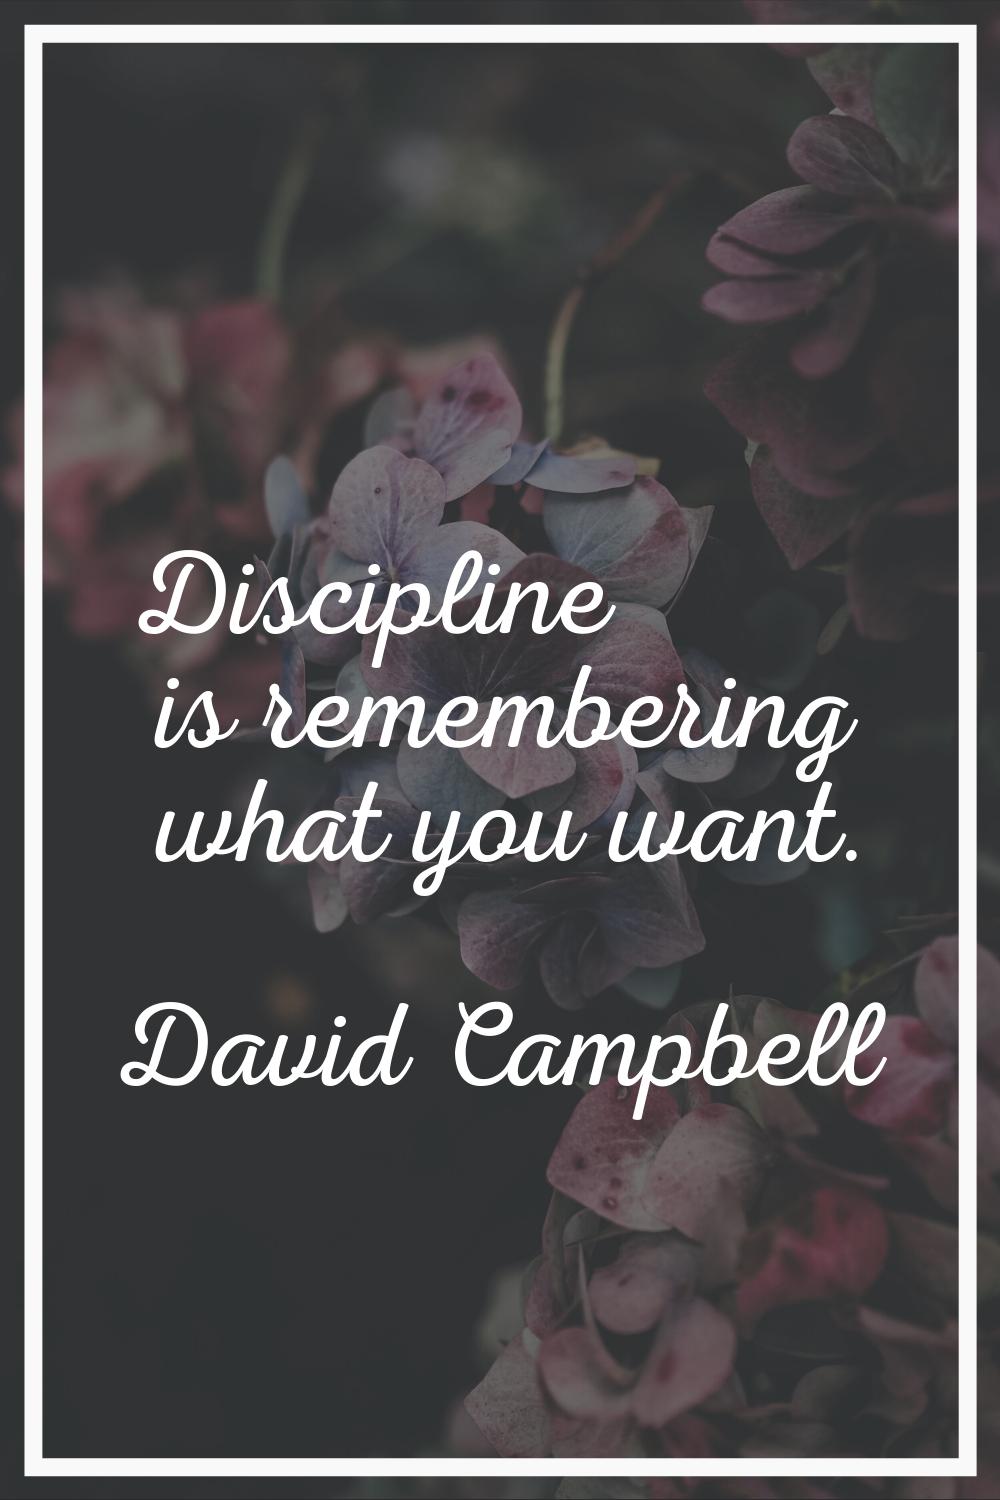 Discipline is remembering what you want.